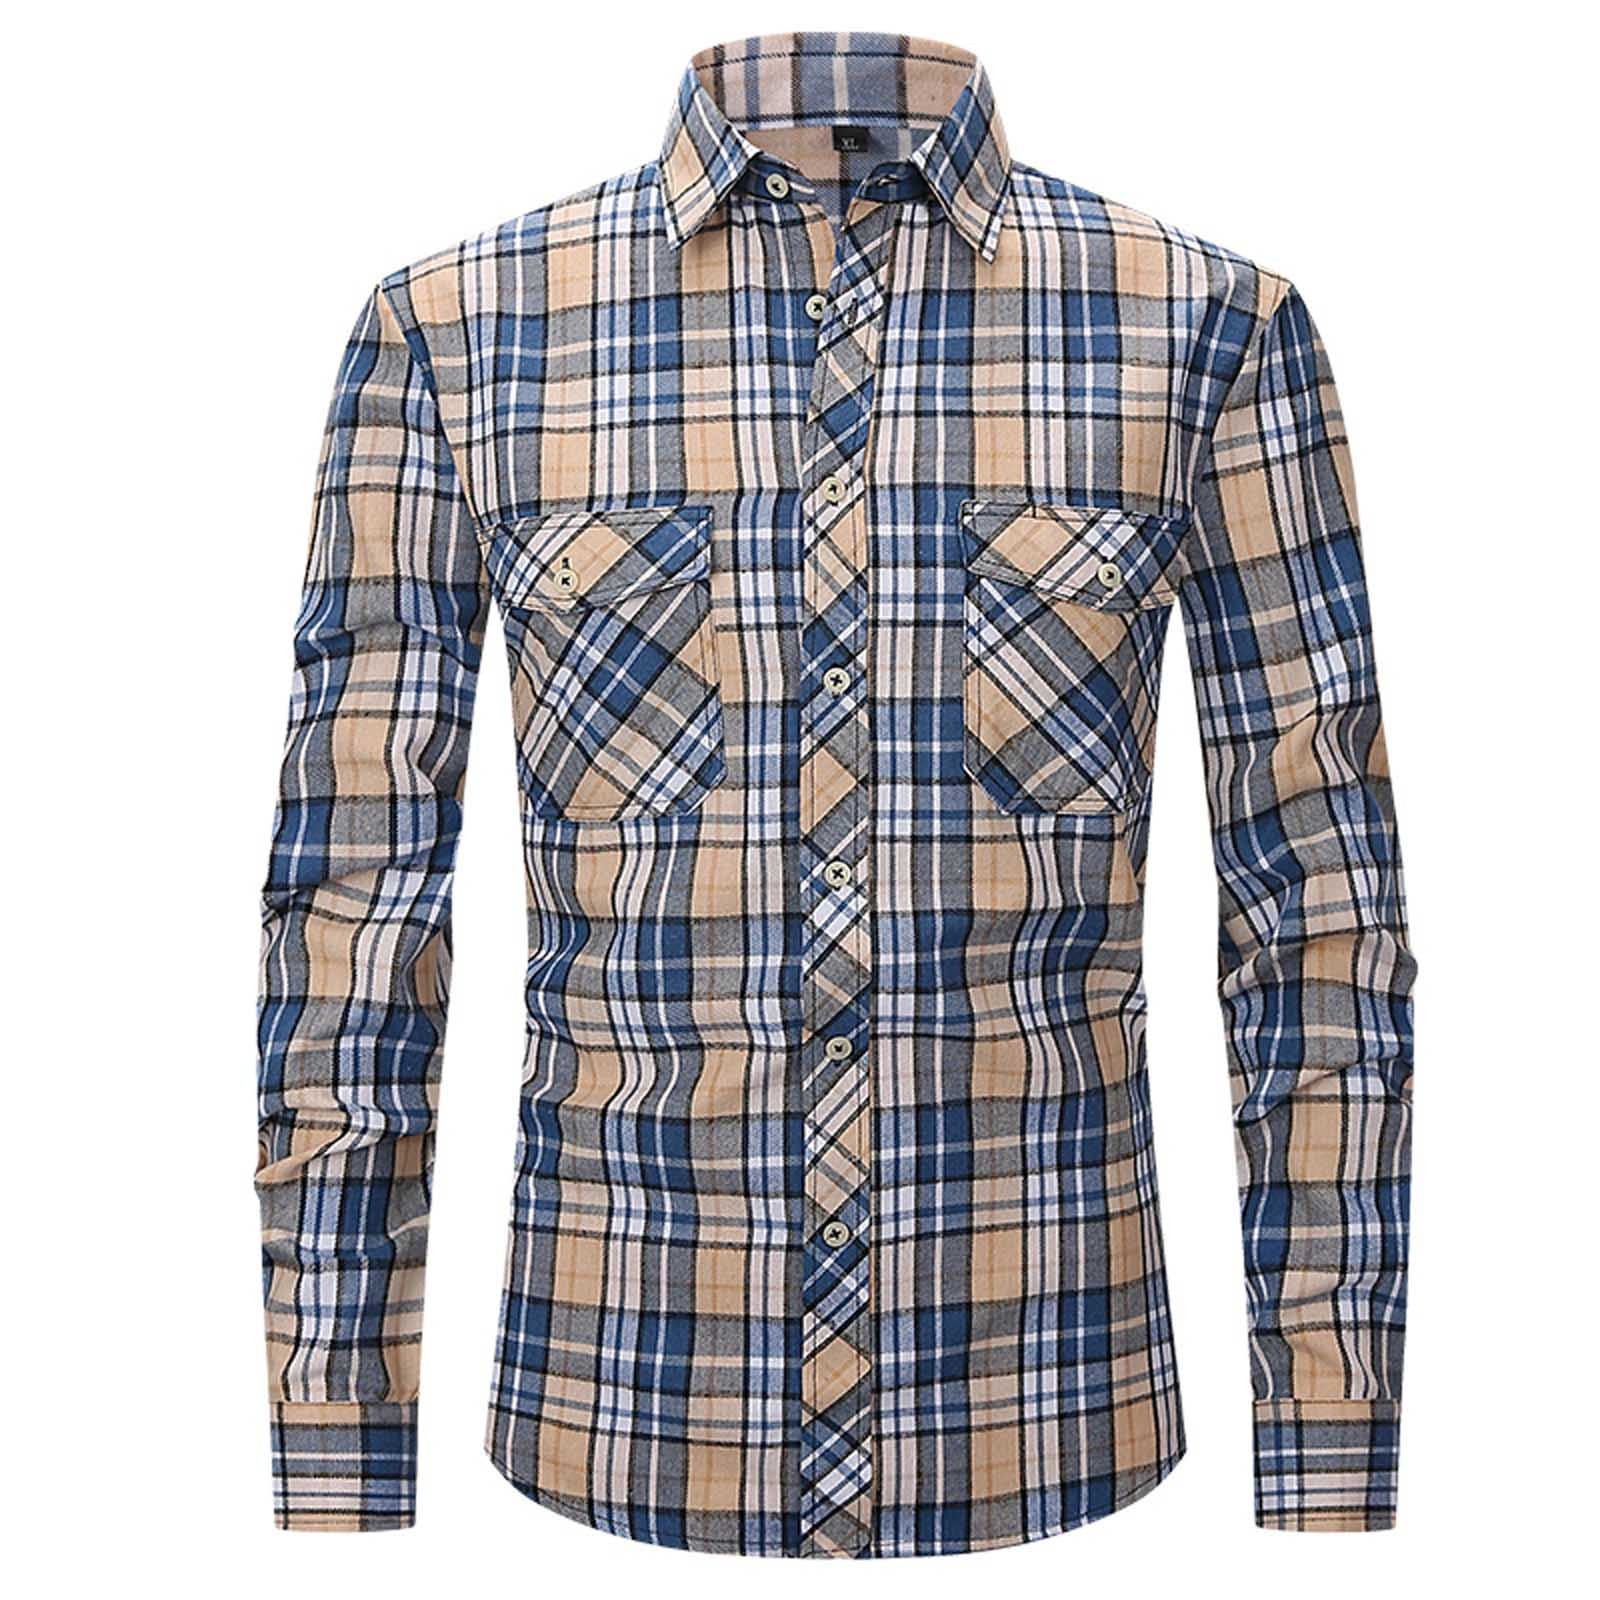 Men's western shirts with snaps